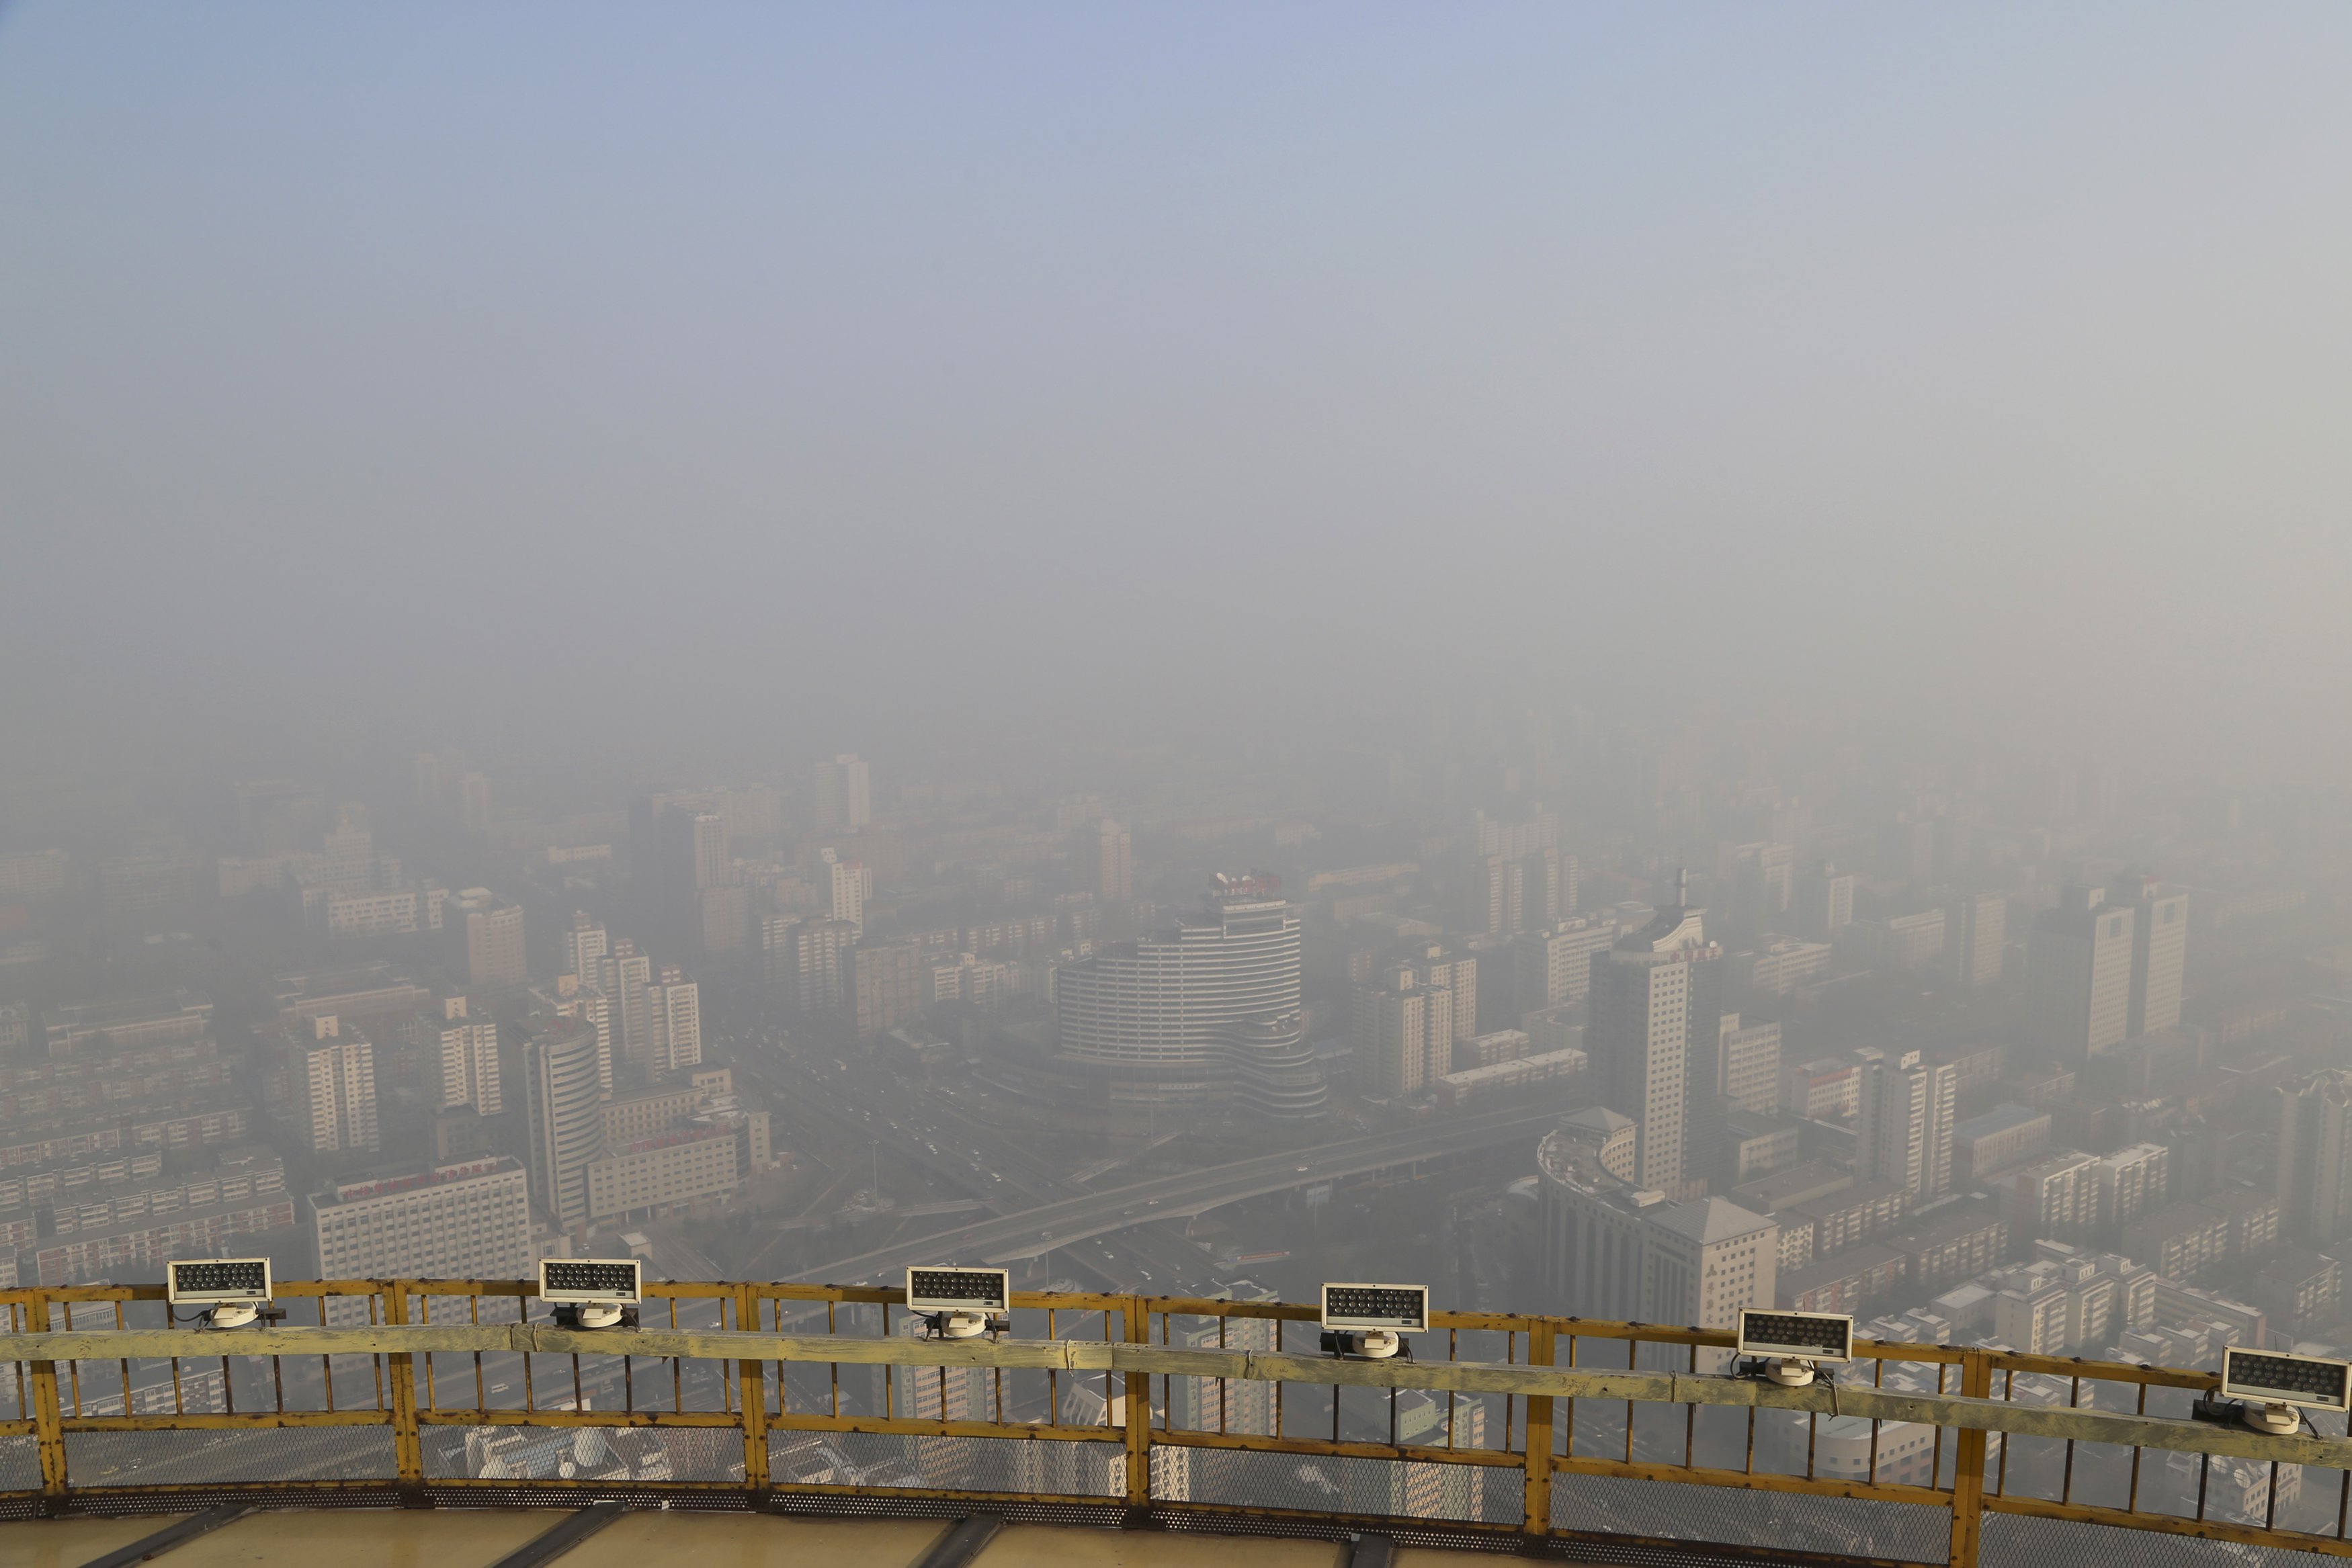 A view from a viewing deck on the China Central Radio and Television Tower shows the city of Beijing in heavy smog, China, November 29, 2015. Heavy smog continues in Beijing on Sunday after a yellow alert of air pollution was issued on Friday, local media reported. Beijing plans to ramp up its already tough car emission standards by 2017 in a bid by one of the world's most polluted cities to improve its often hazardous air quality. REUTERS/Stringer CHINA OUT. NO COMMERCIAL OR EDITORIAL SALES IN CHINA